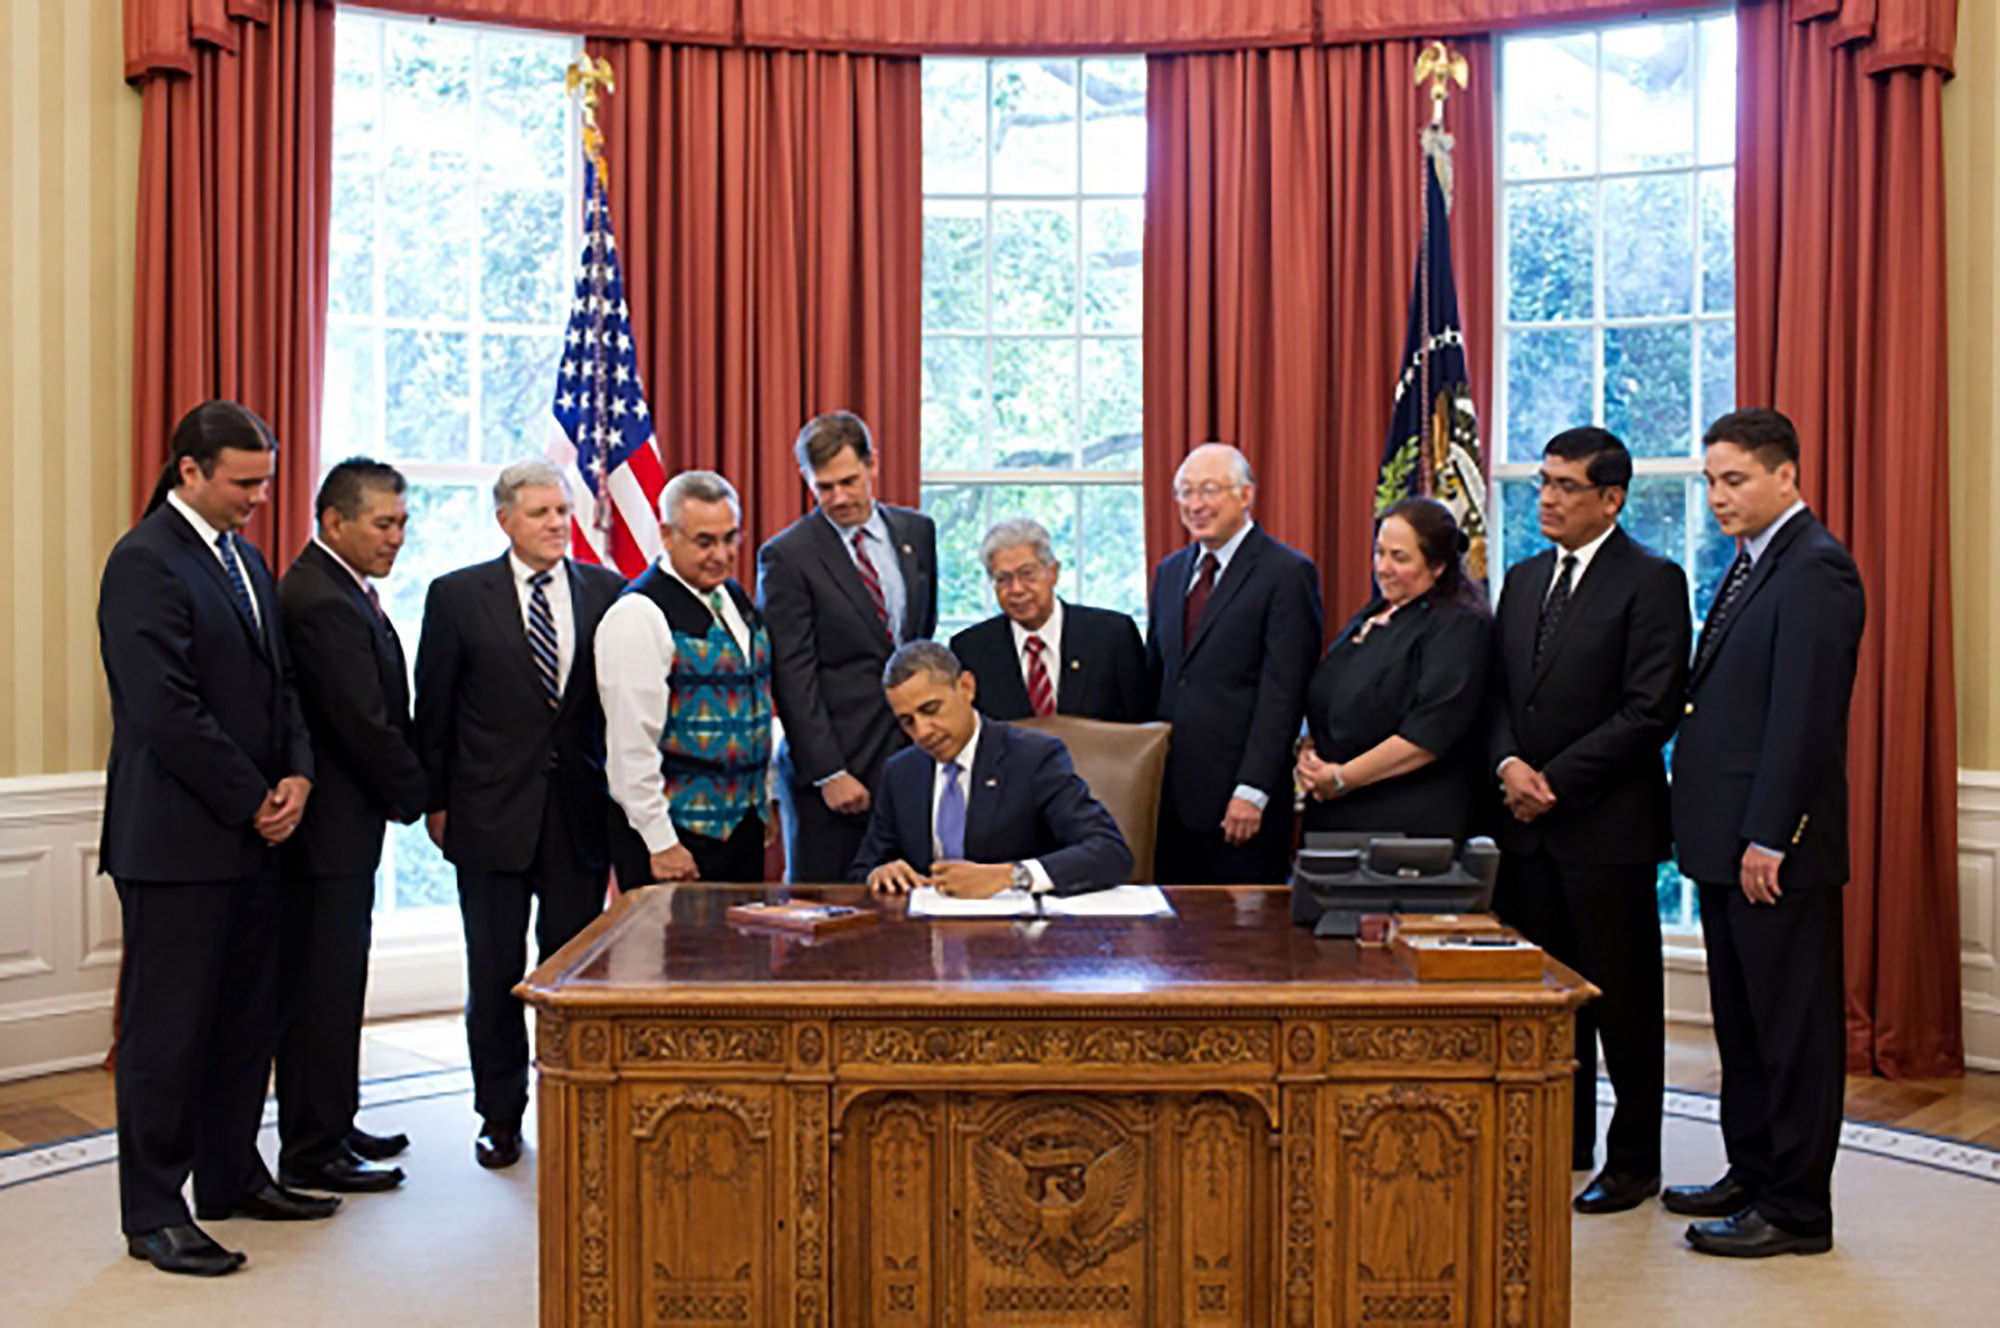 After Six Years Obama Administration Gets Good Marks On Tribal Issues